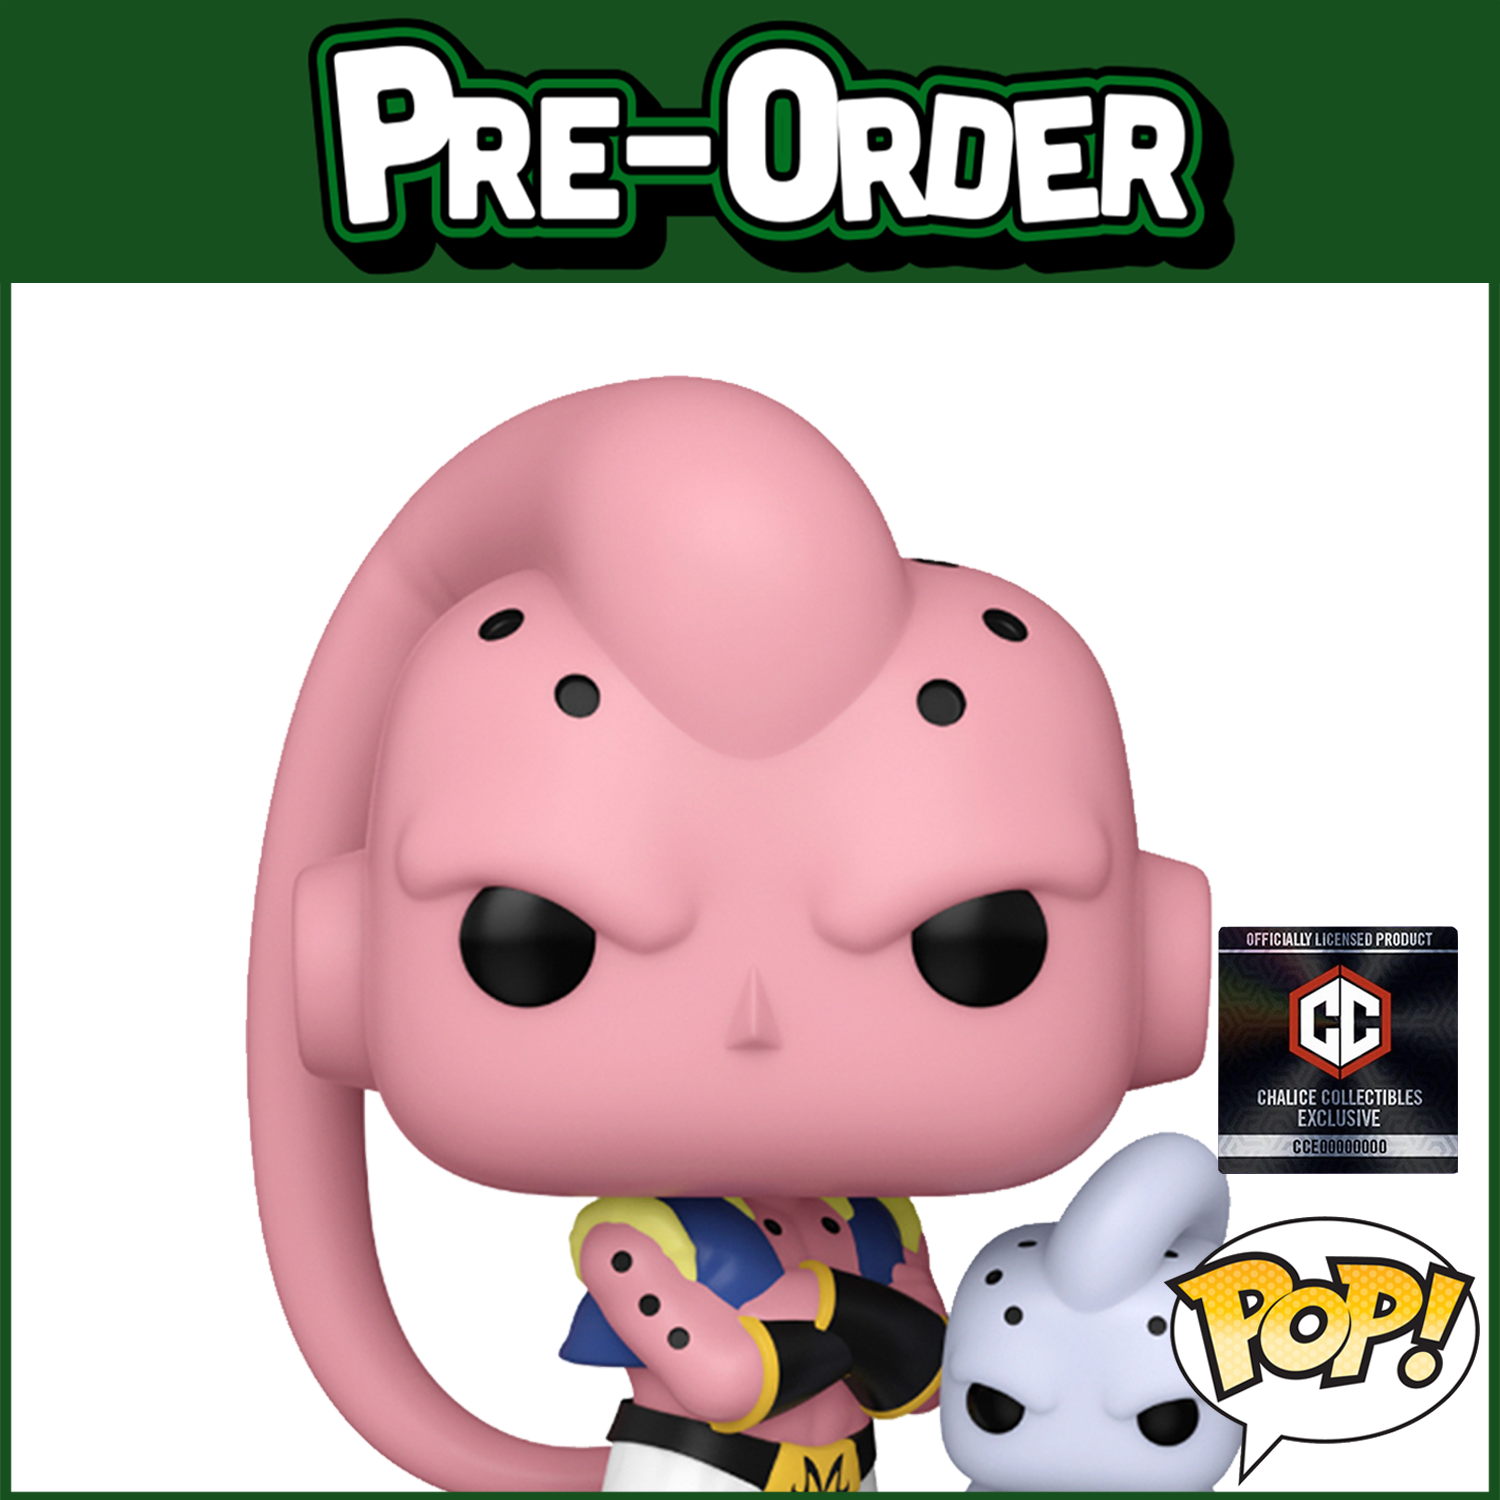 POP! Animation: Dragon Ball Z - Super Buu with Ghost #1464 (PR: Chalice  Collectibles Exclusive)